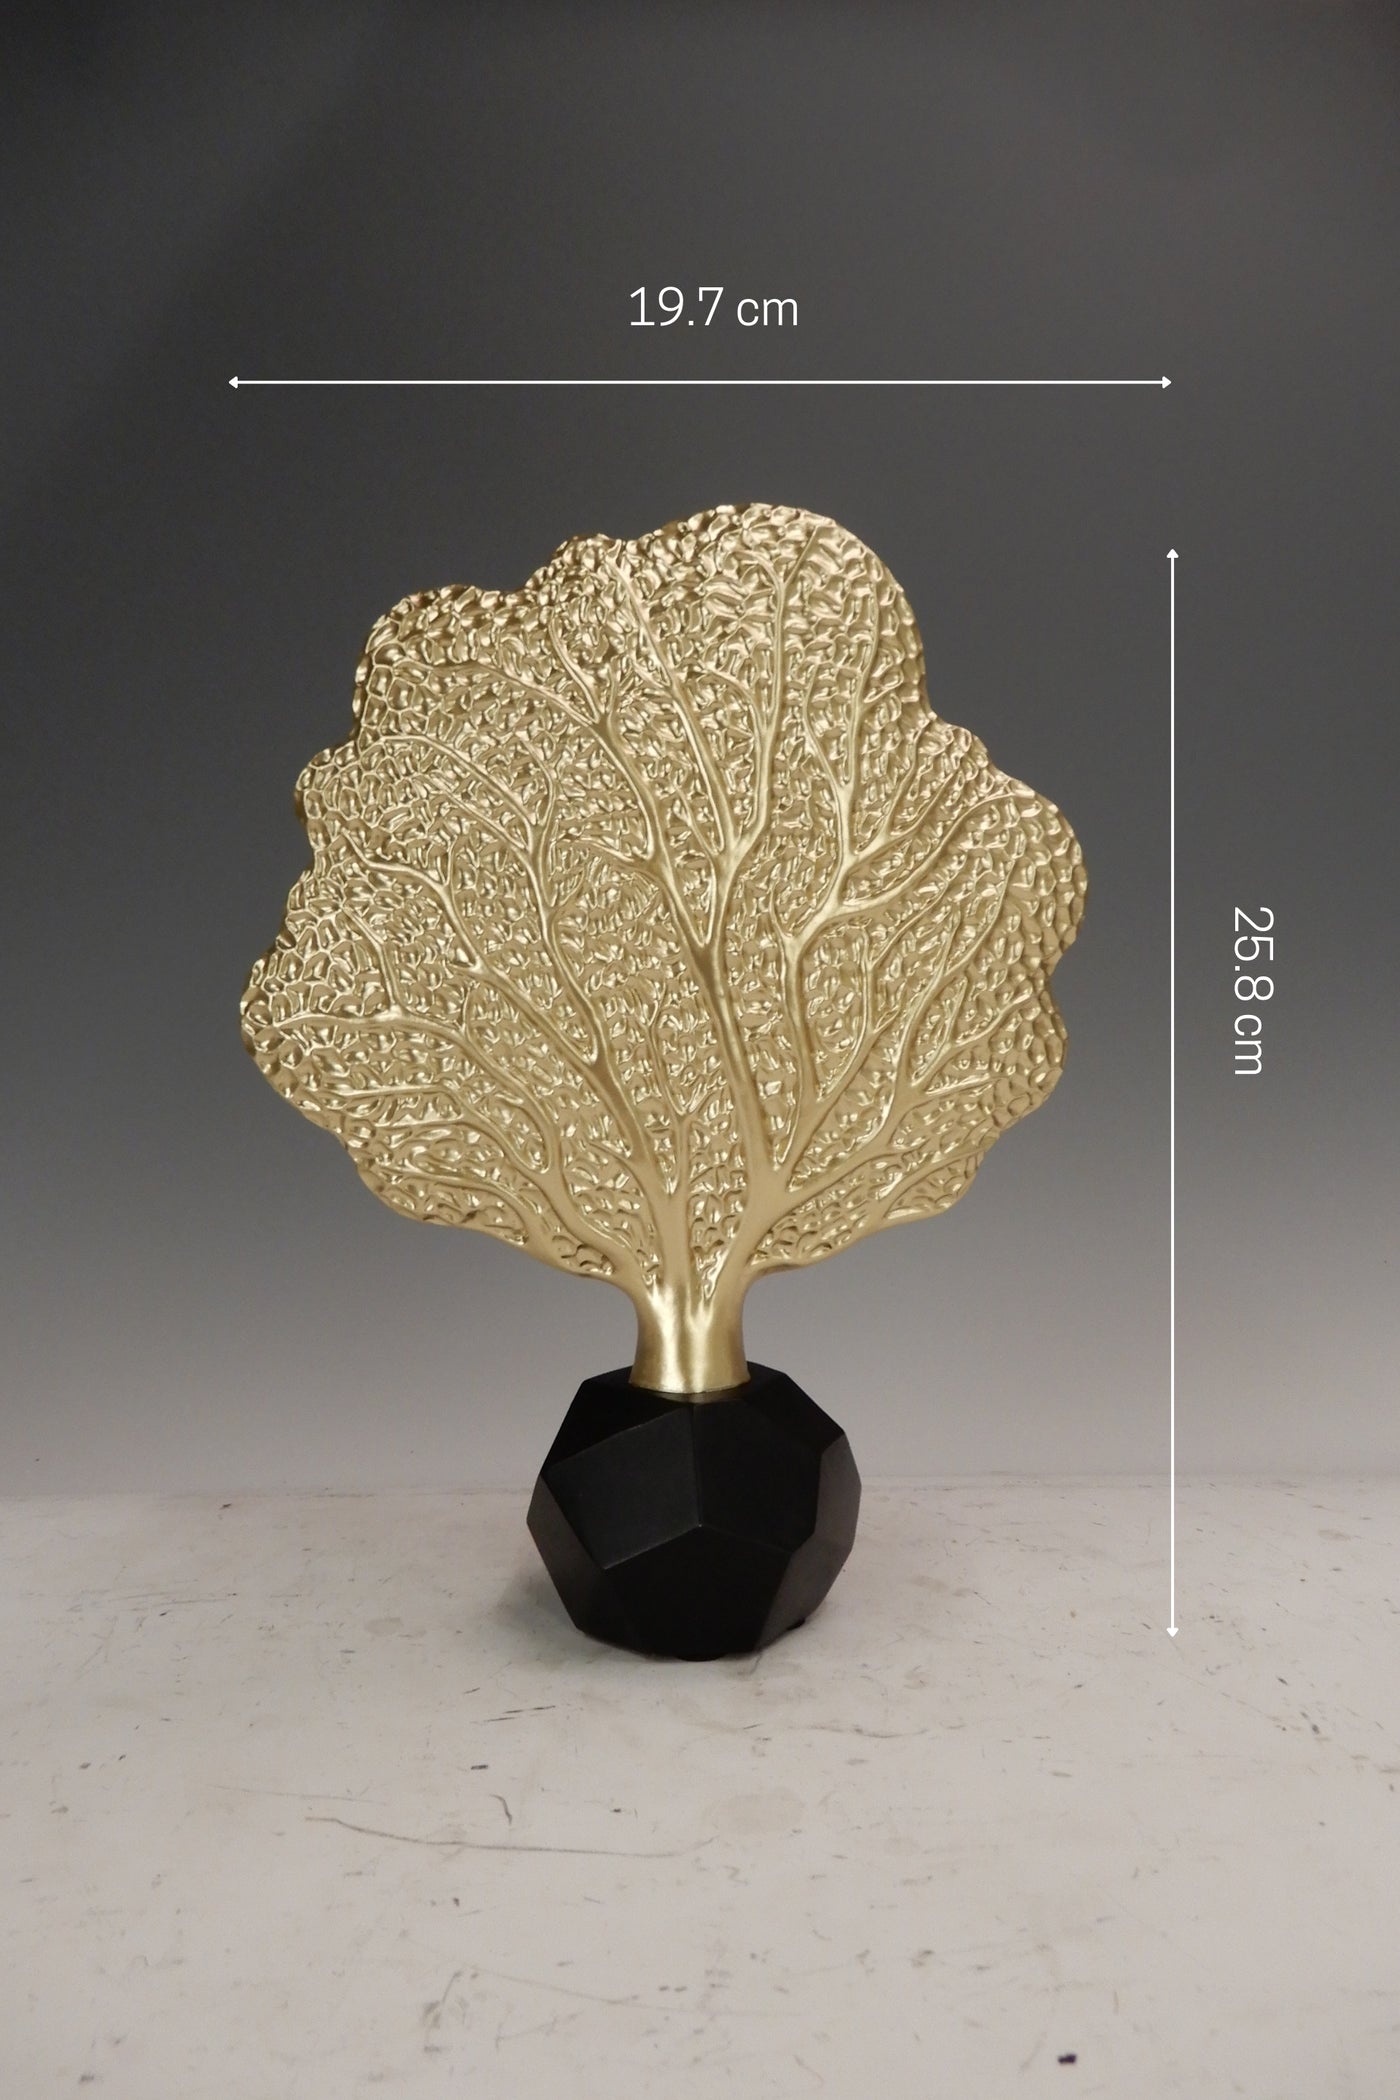 Golden Resin Tree Showpiece for your home or office decor